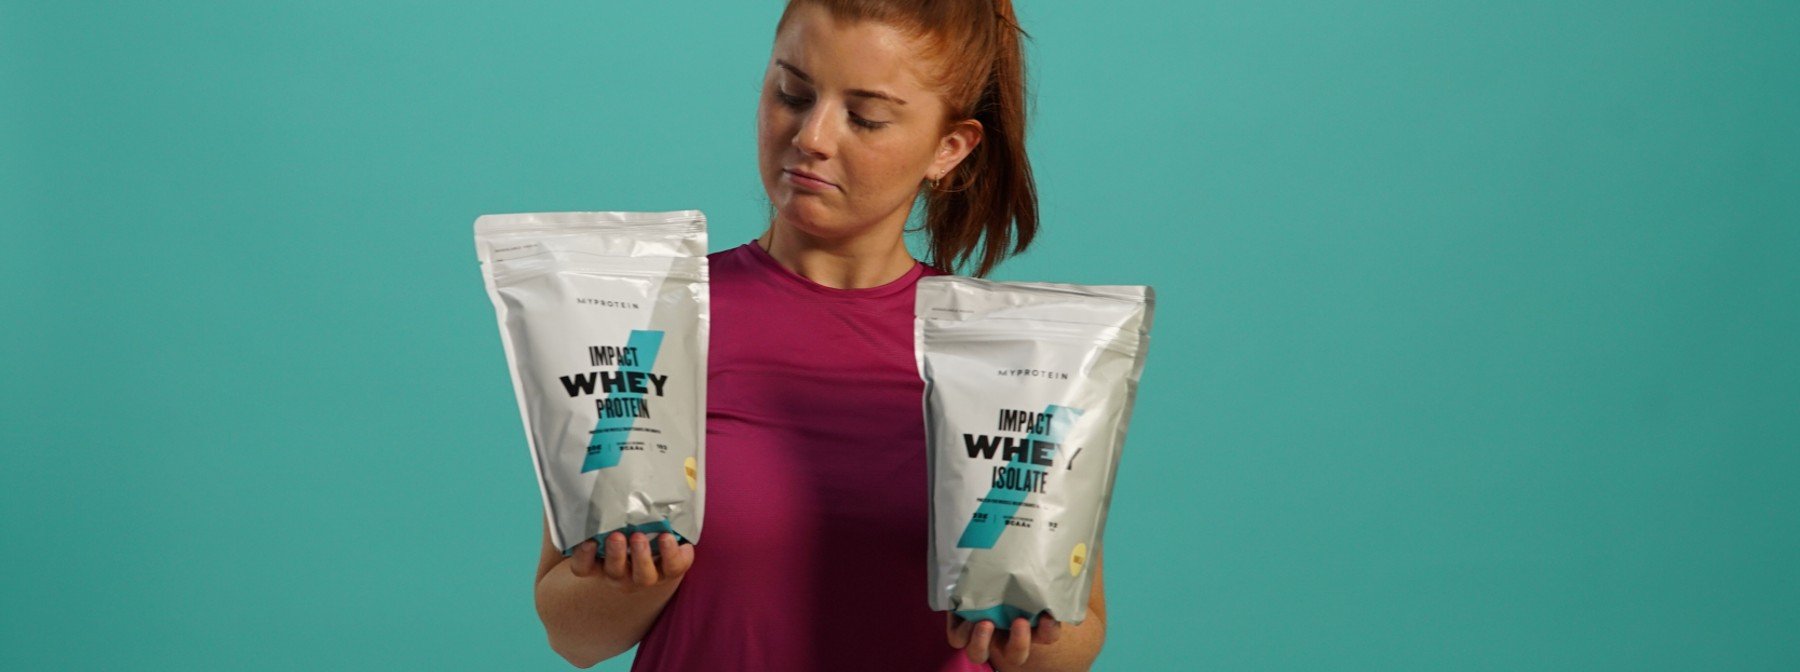 Whey Isolate Vs. Whey Concentrate | Nutritionist Explains The Difference